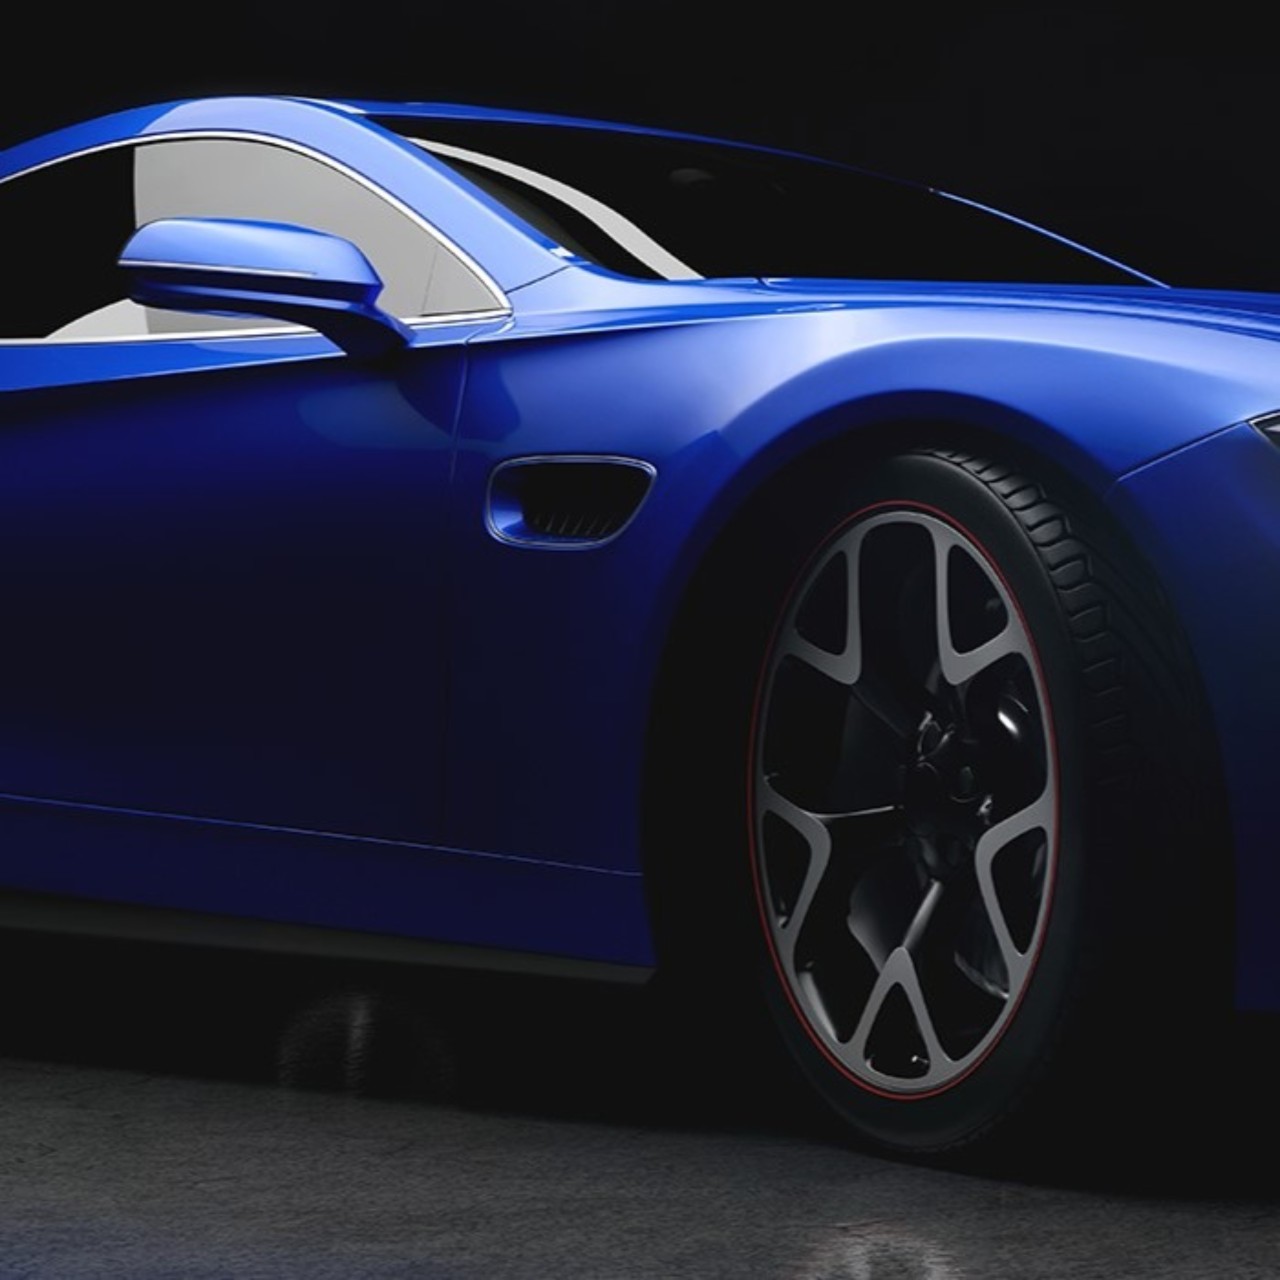 New sports car has a high-end blue finish